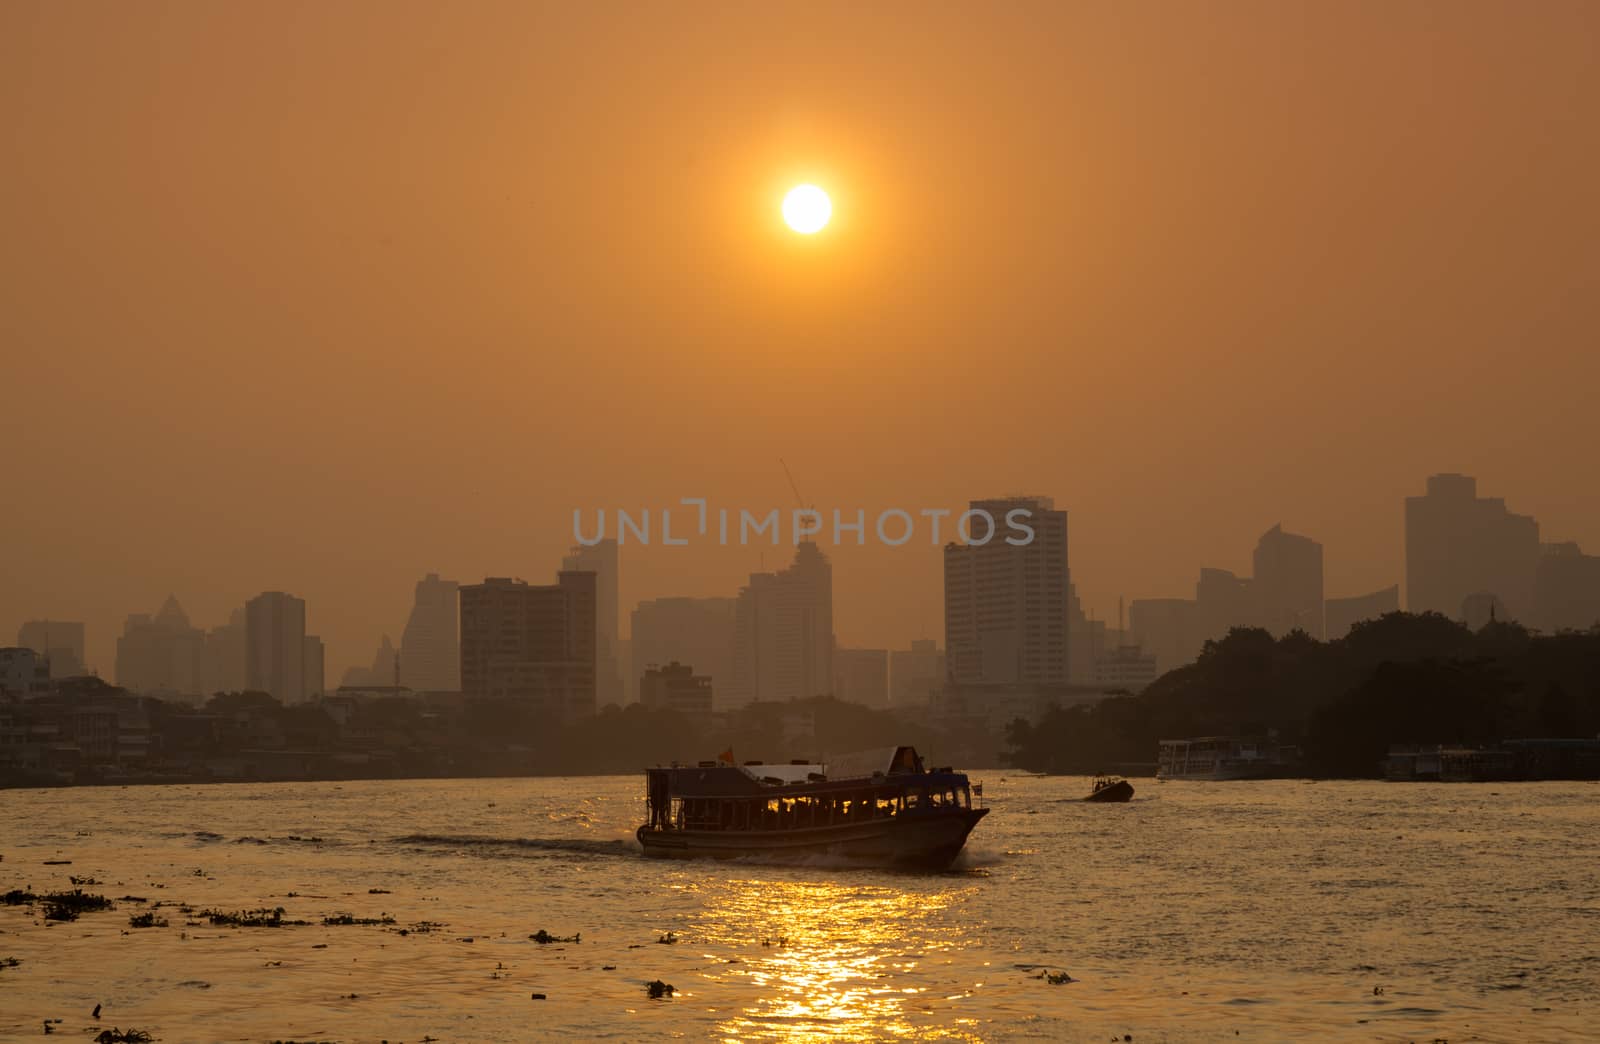 Boat traffic on the river, Bangkok city. by a454